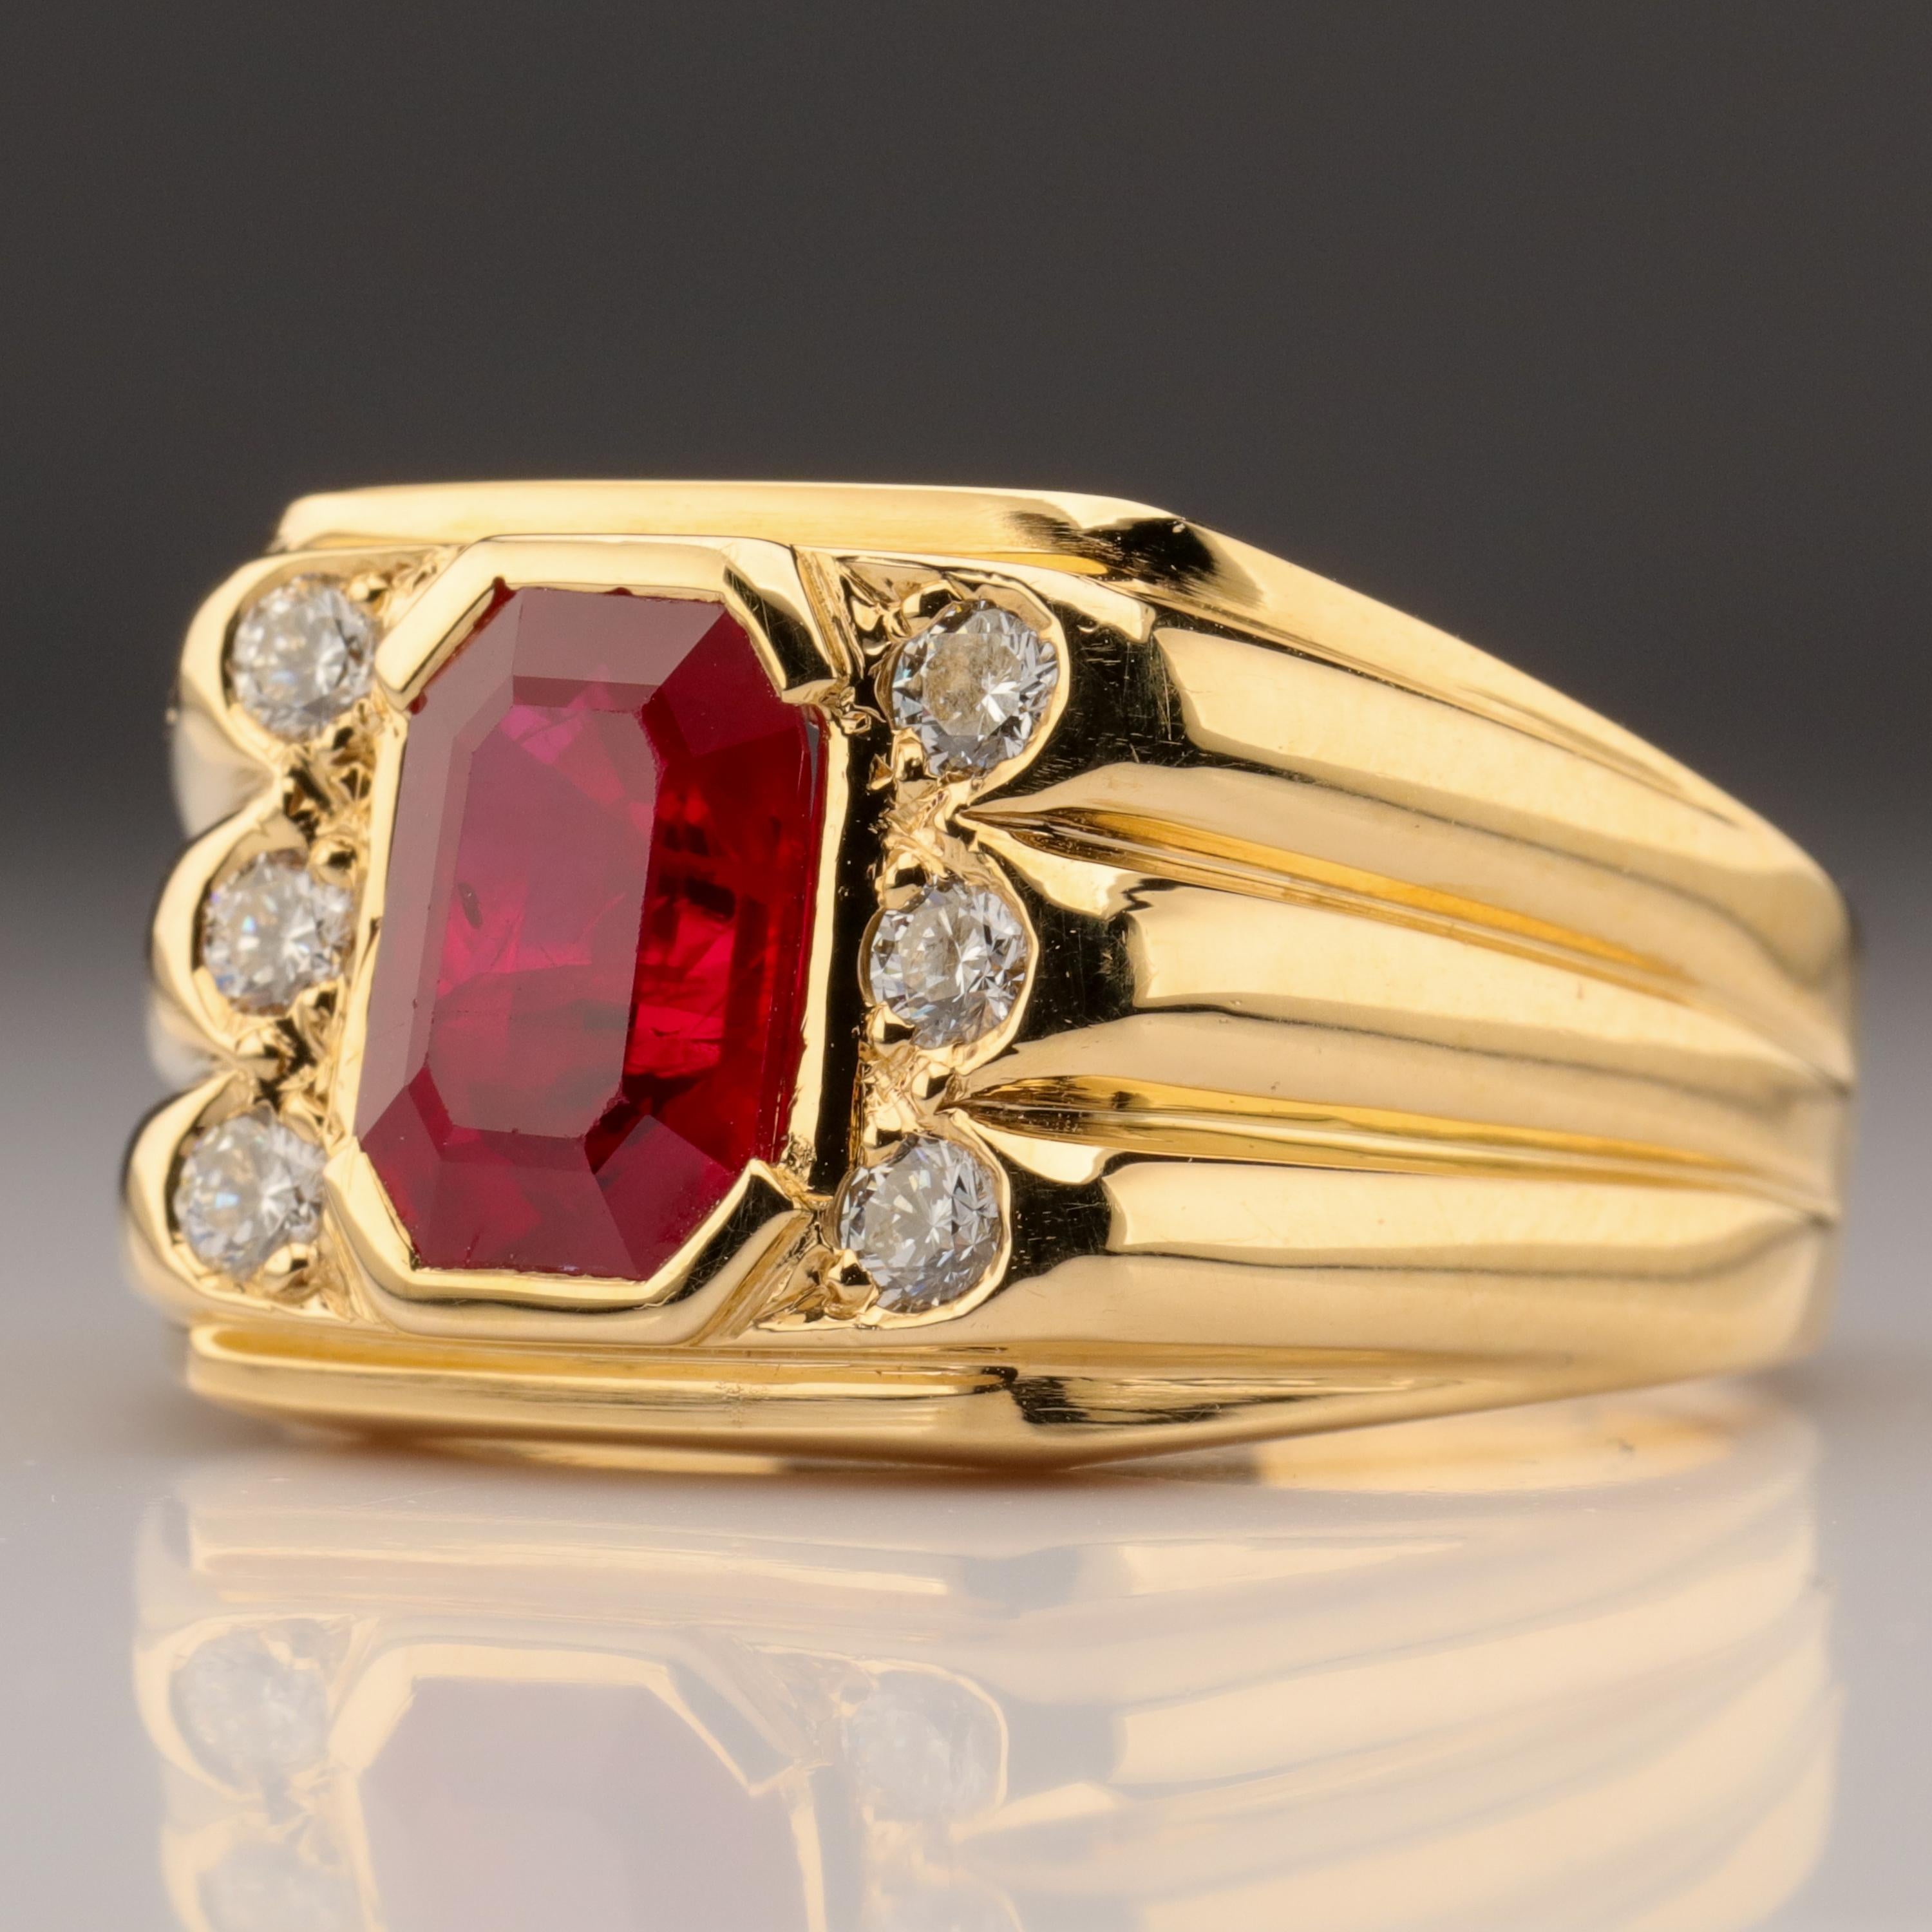 Contemporary Men's Ruby and Diamond Ring GIA Certified as 